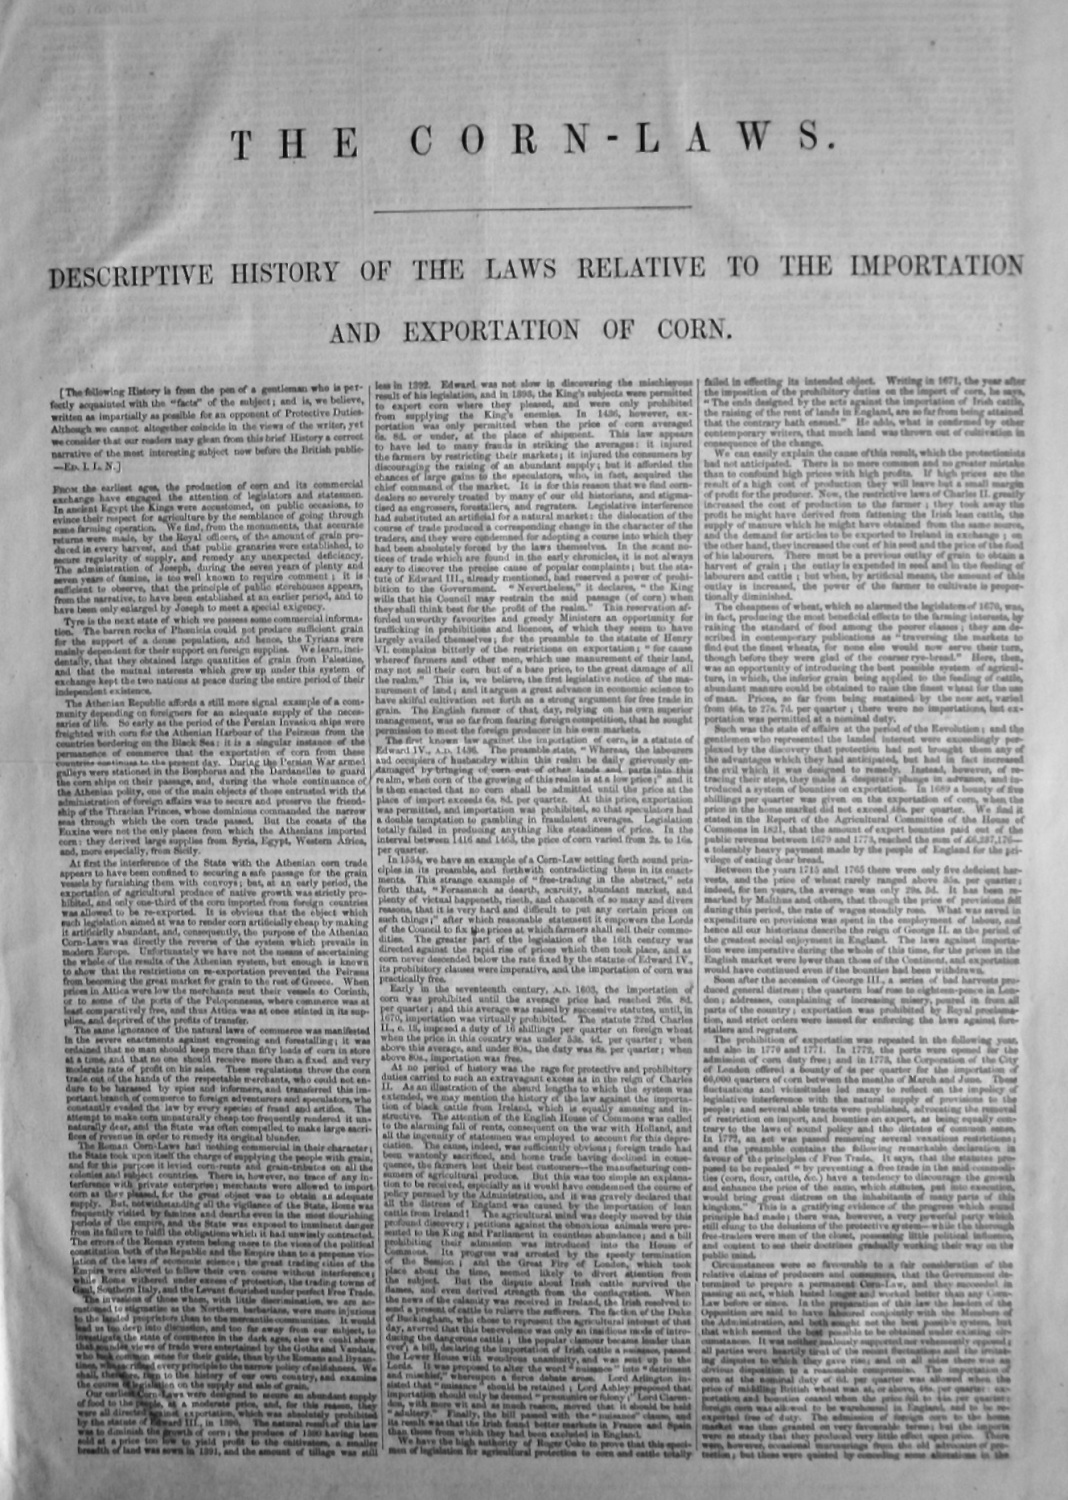 The Corn-Laws. (Descriptive History of the Laws Relative to the Importation